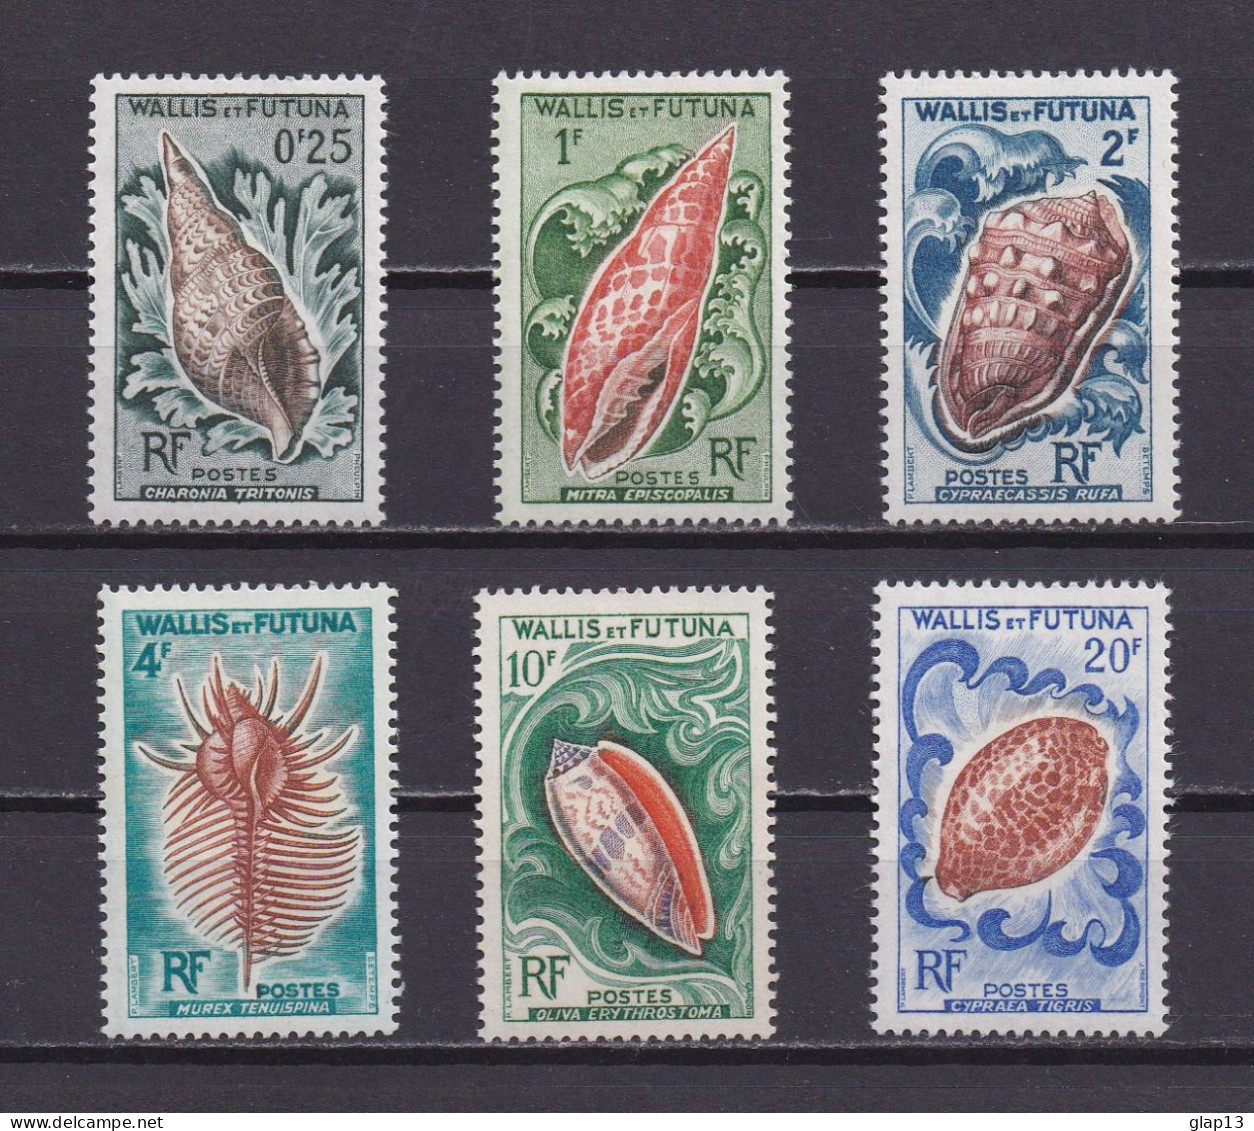 WALLIS ET FUTUNA 1962 TIMBRE N°162/67 NEUF AVEC CHARNIERE COQUILLAGES - Unused Stamps